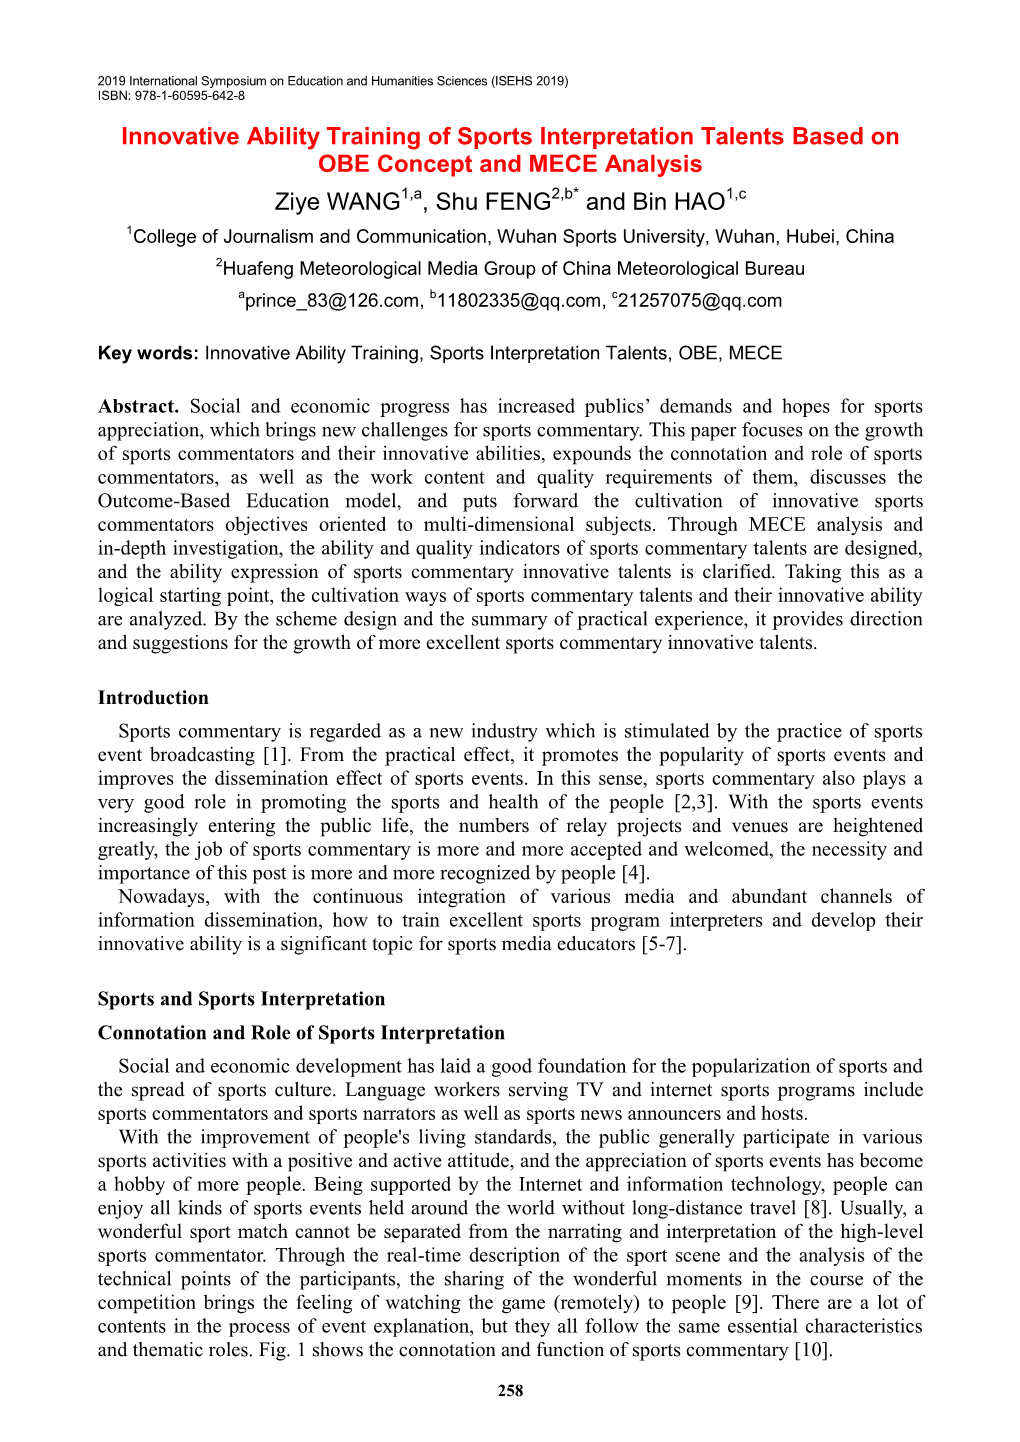 Innovative Ability Training of Sports Interpretation Talents Based on OBE Concept and MECE Analysis Ziye WANG , Shu FENG And